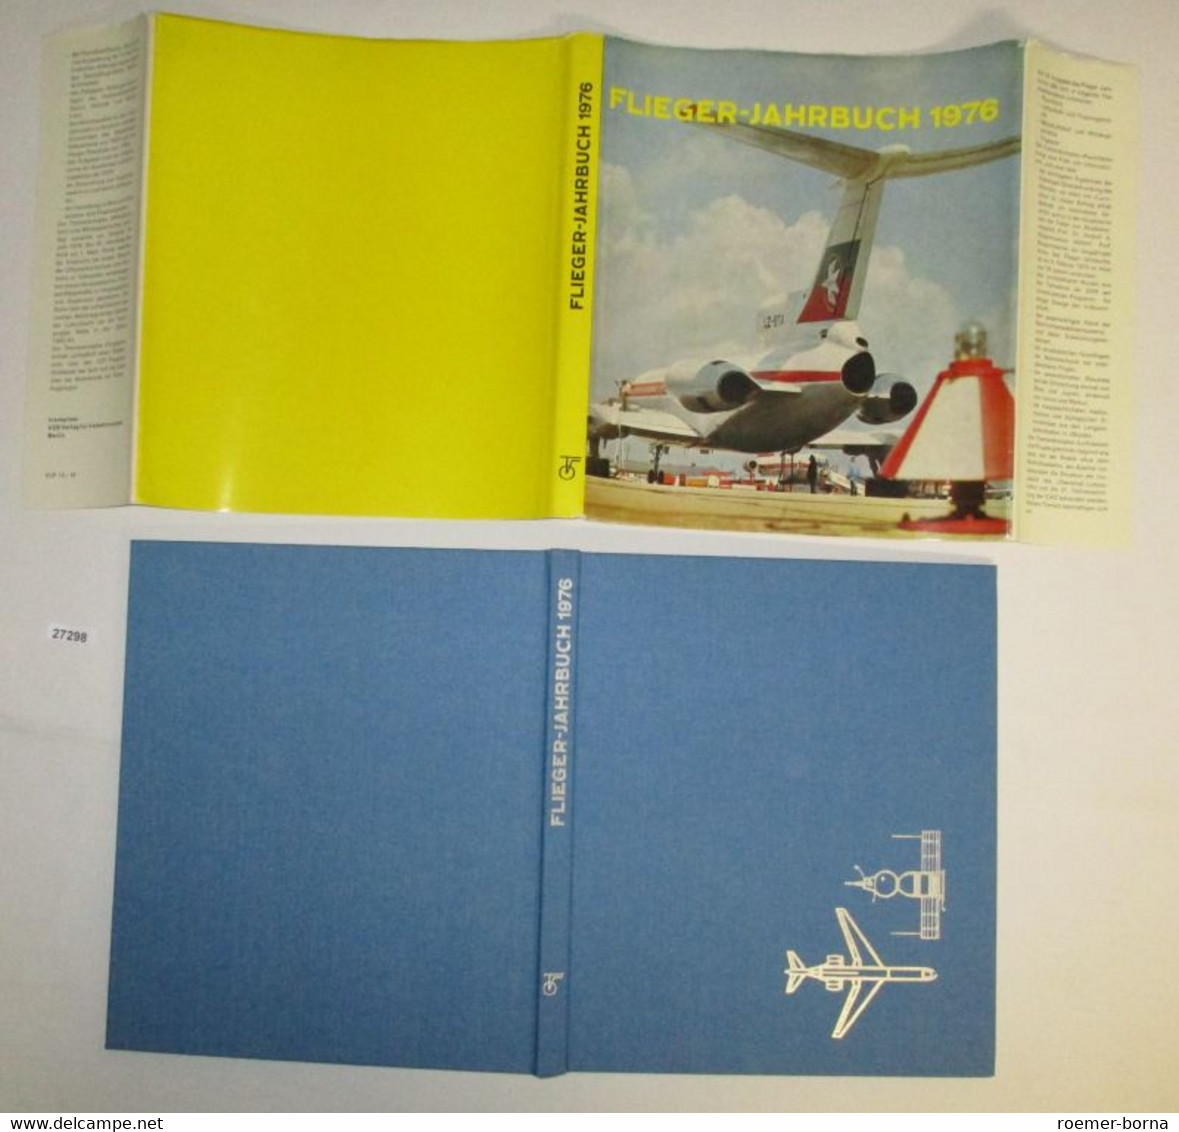 Flieger Jahrbuch 1976 - Calendriers